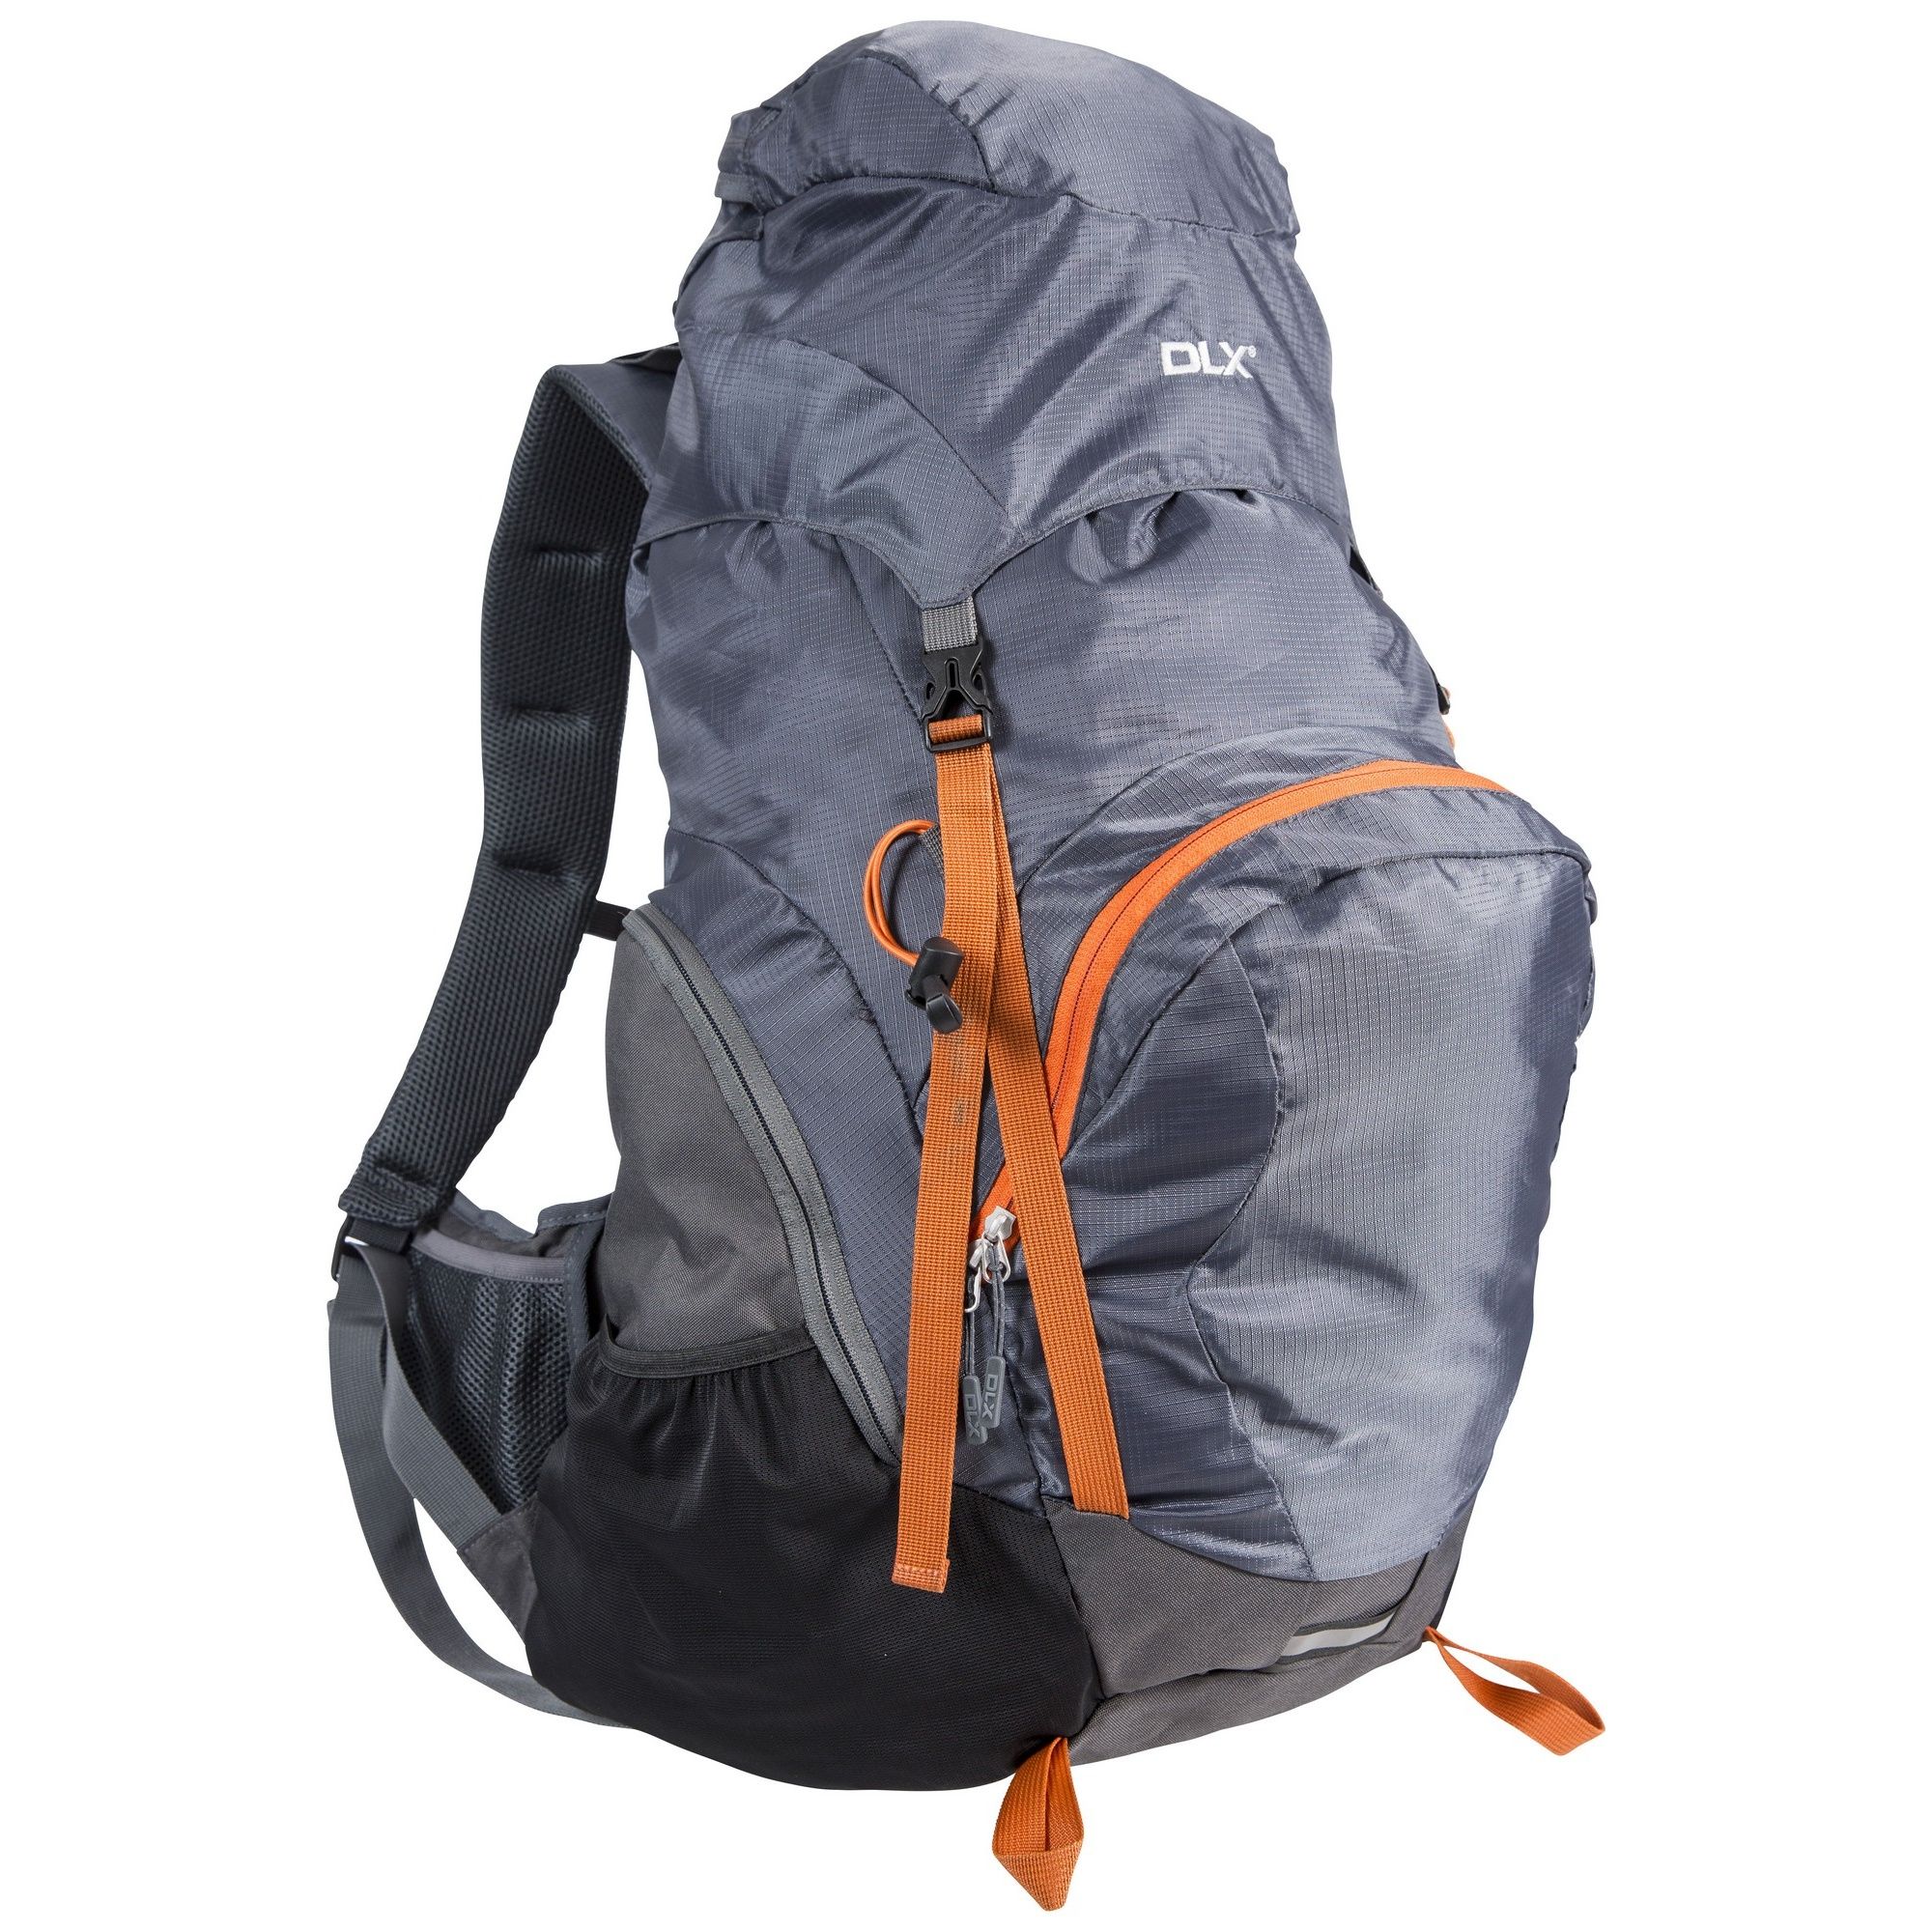 100% 420D polyester. 70 litre DLX rucksack. Airflow system. Trekking pole loops. Ice axe loops. Hydration pack access. 2000mm waterproof raincover.